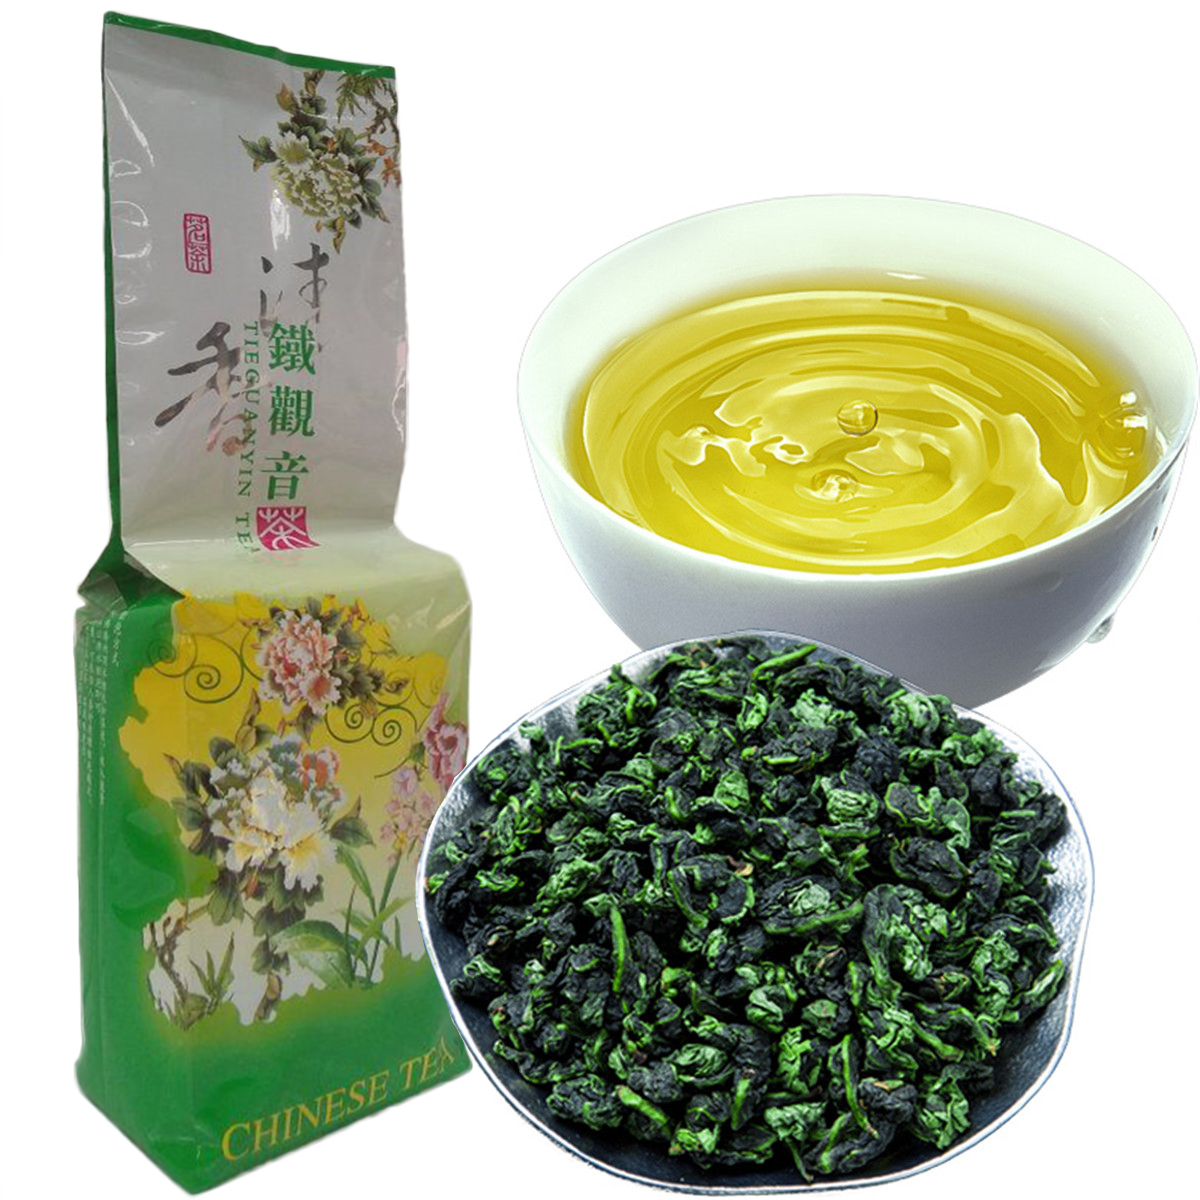 

250g Promotion Vacuum package Premium Fragrant tea Type Traditional Chinese Milk Oolong cha TiKuanYin Green Tea Health Care TieGuanYin Tae